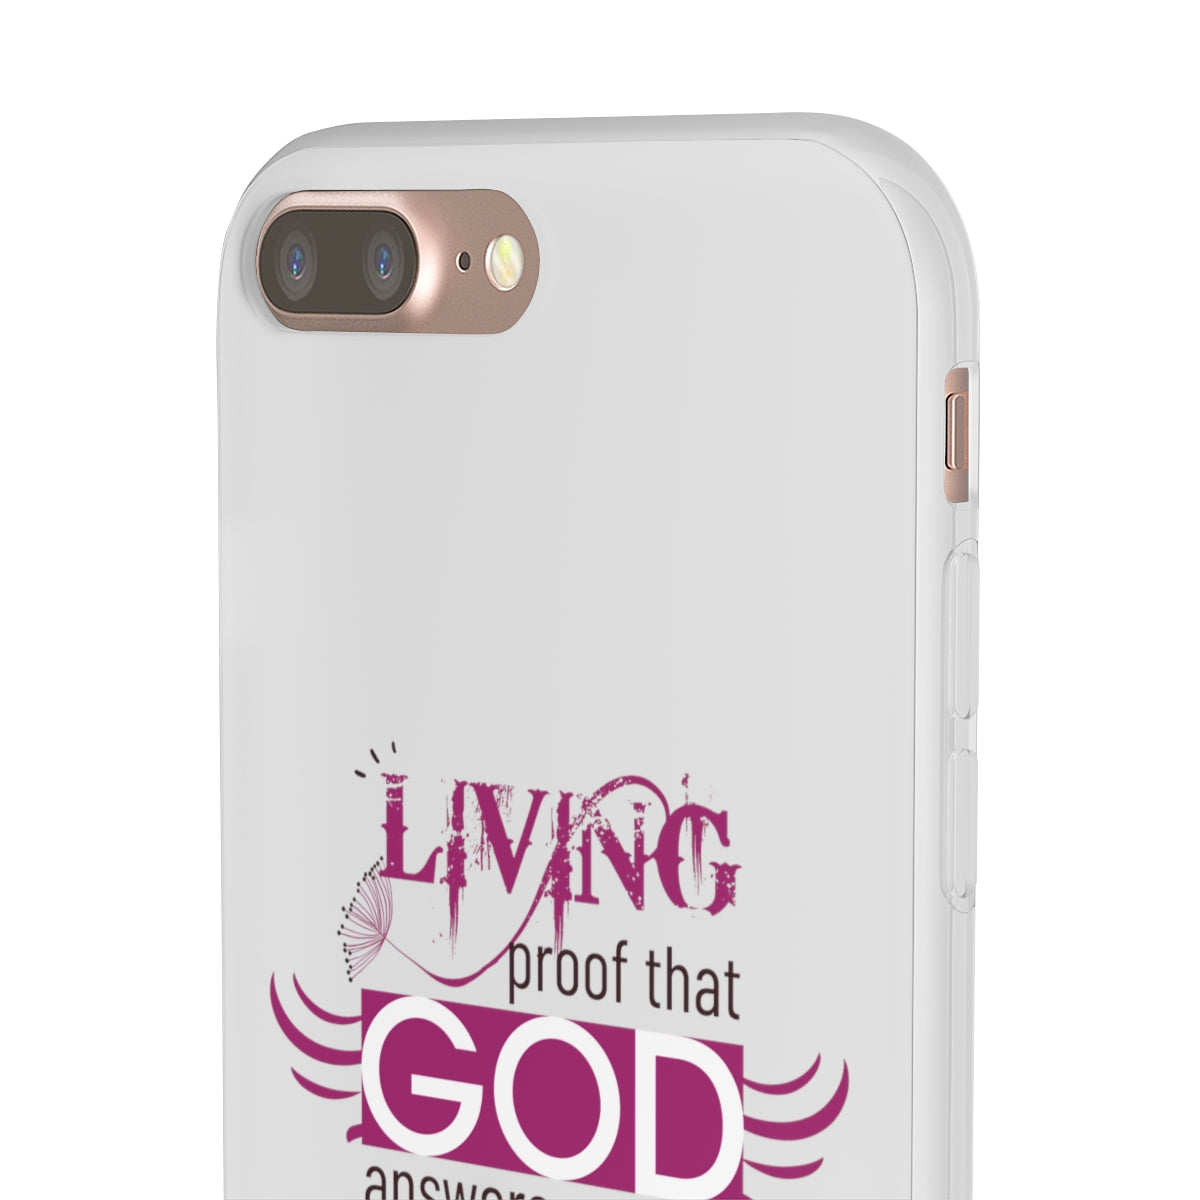 Living Proof That God Answers Prayers Flexi Phone Case. compatible with select IPhone & Samsung Galaxy Phones Printify